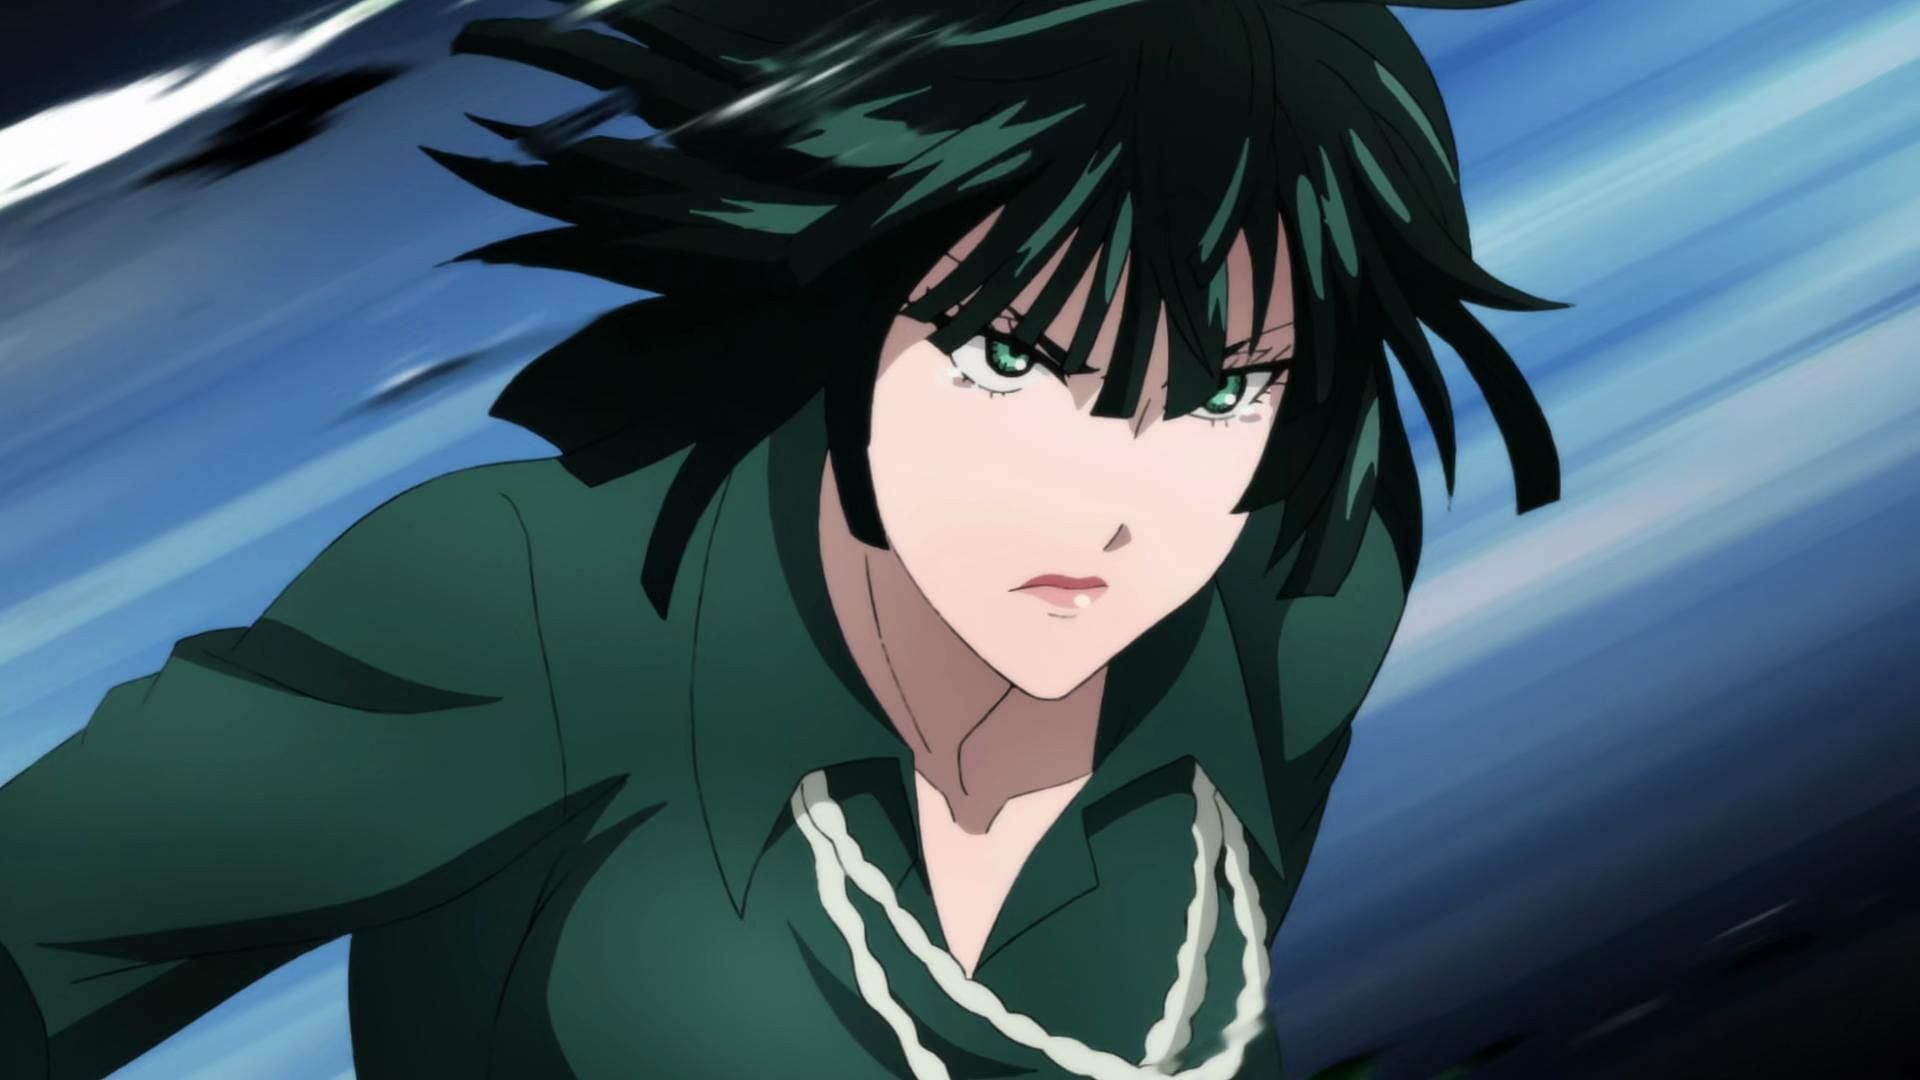 Fubuki as seen in the One Punch Man anime (Image via J.C. Staff)